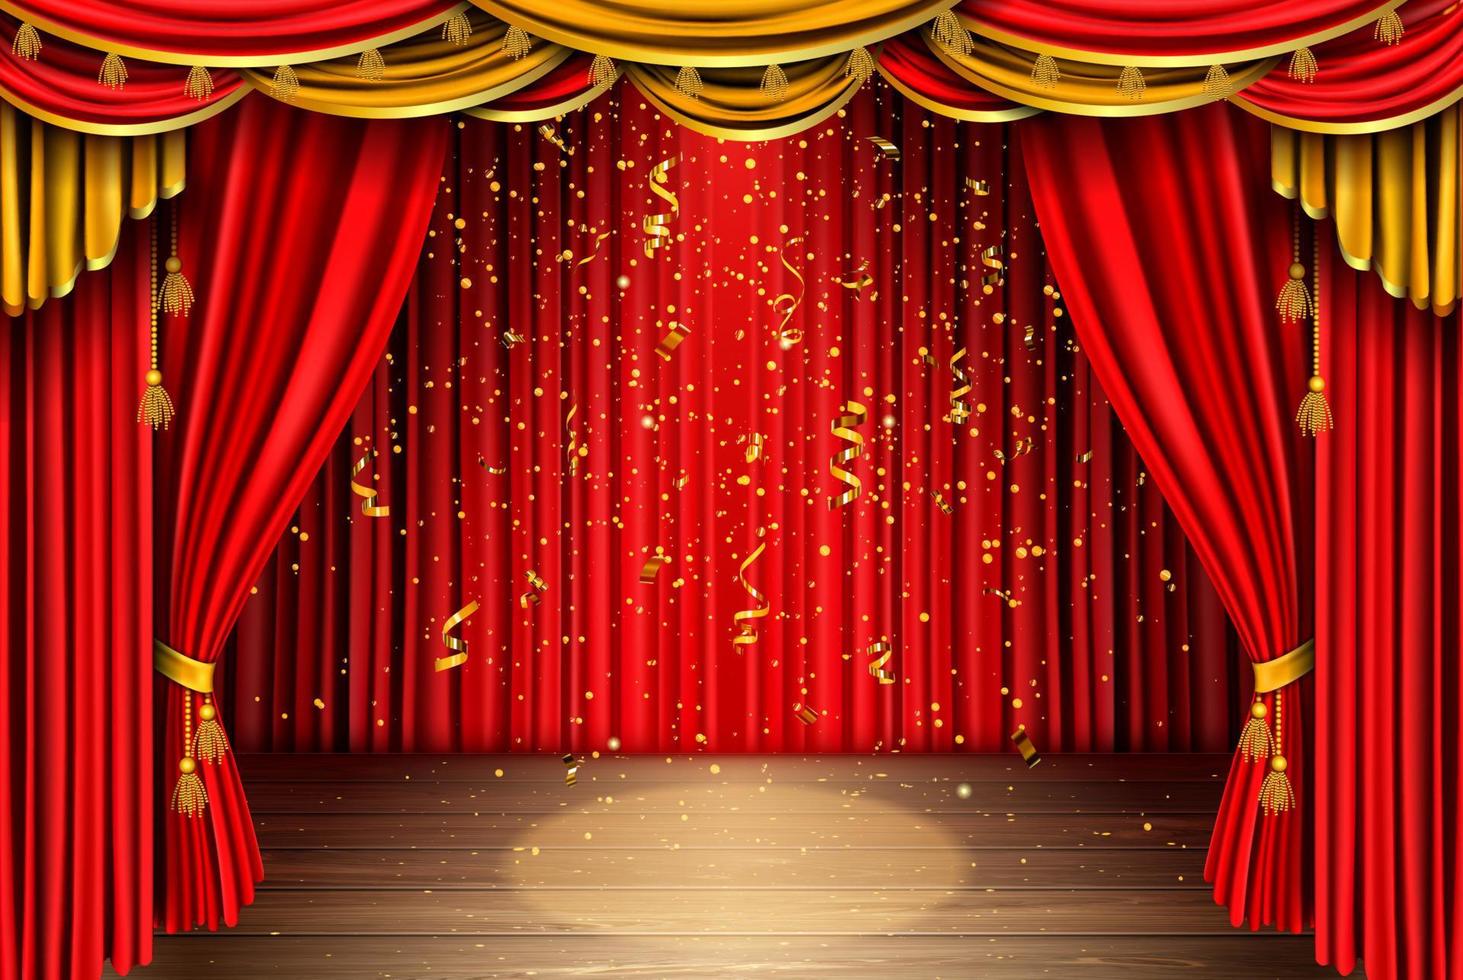 Empty stage with red curtain and falling confetti vector